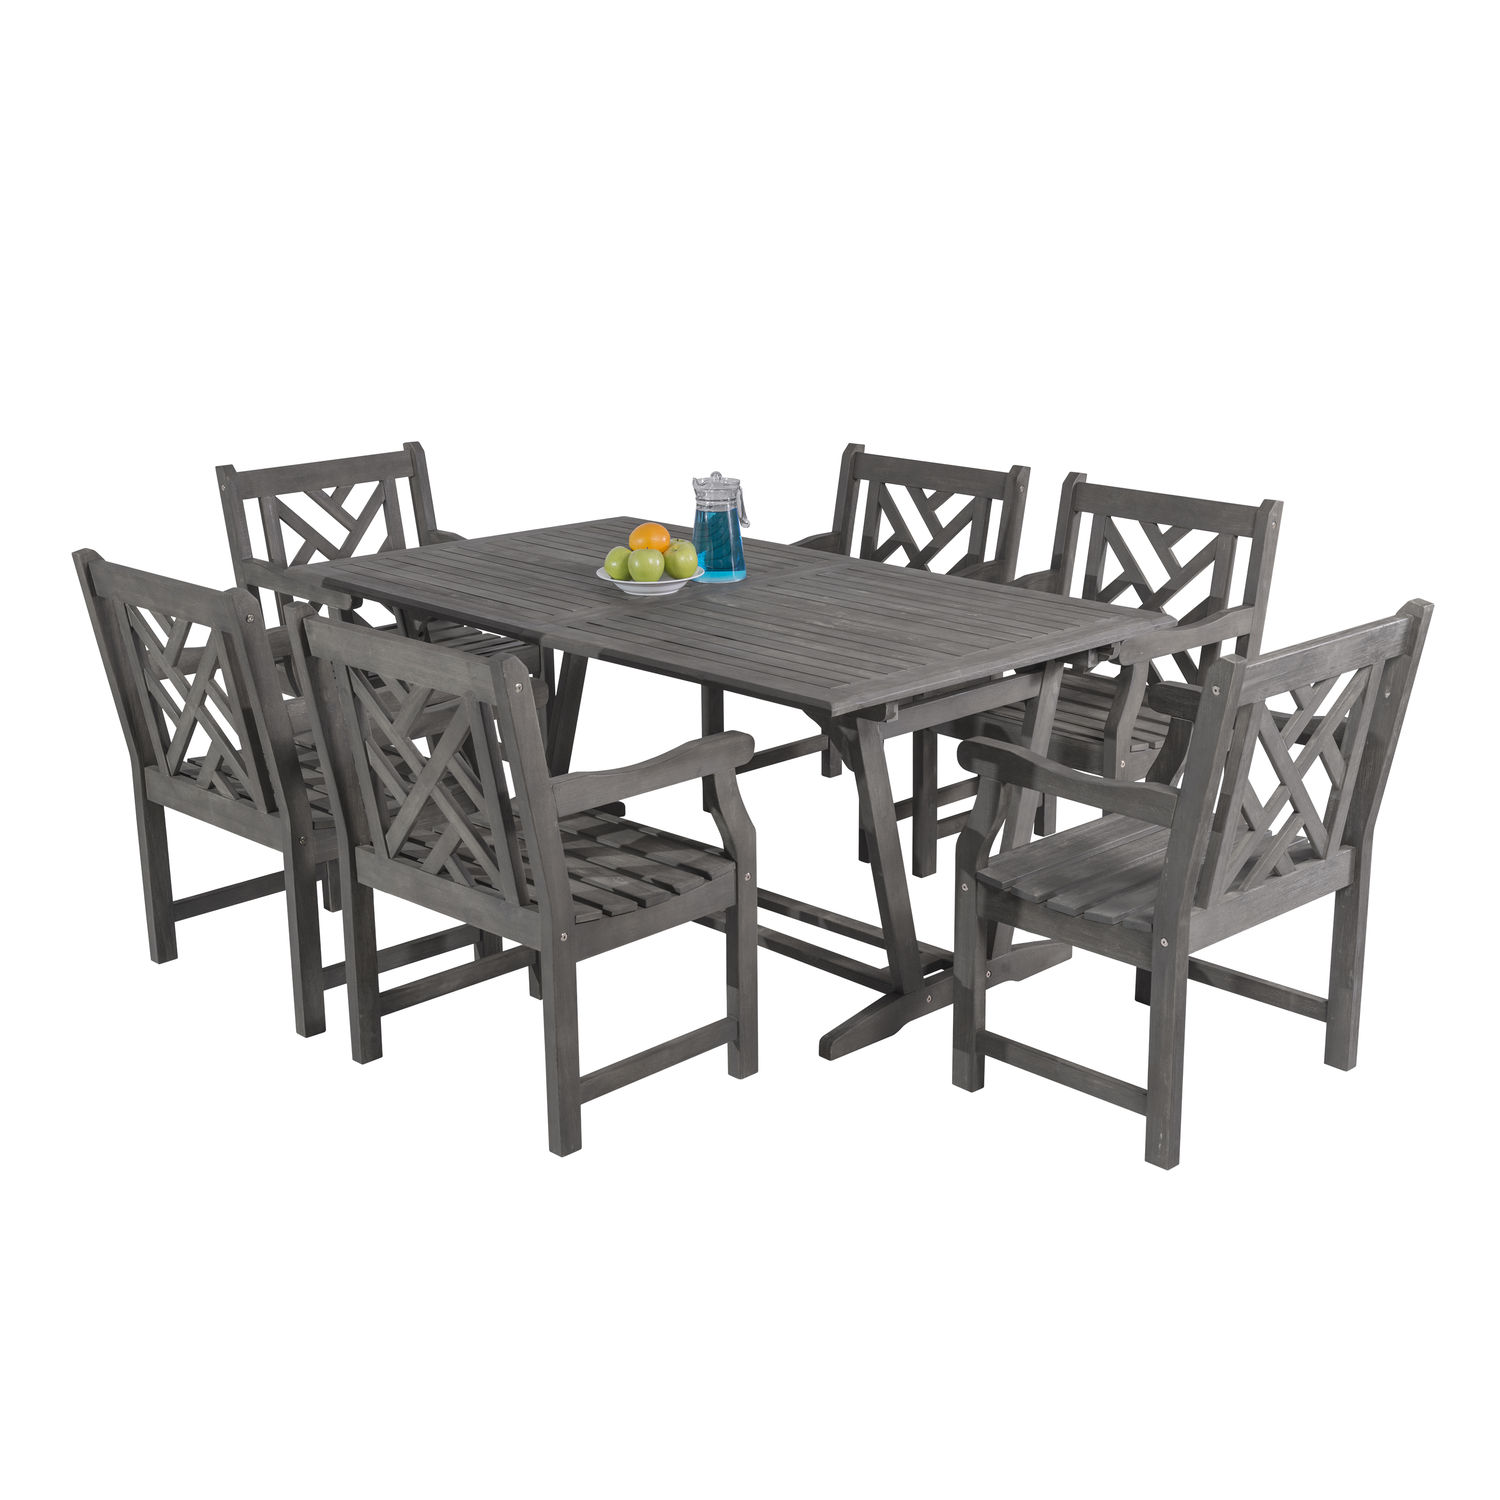 Renaissance Outdoor 7-piece Hand-scraped Wood Patio Dining Set with Extension Table